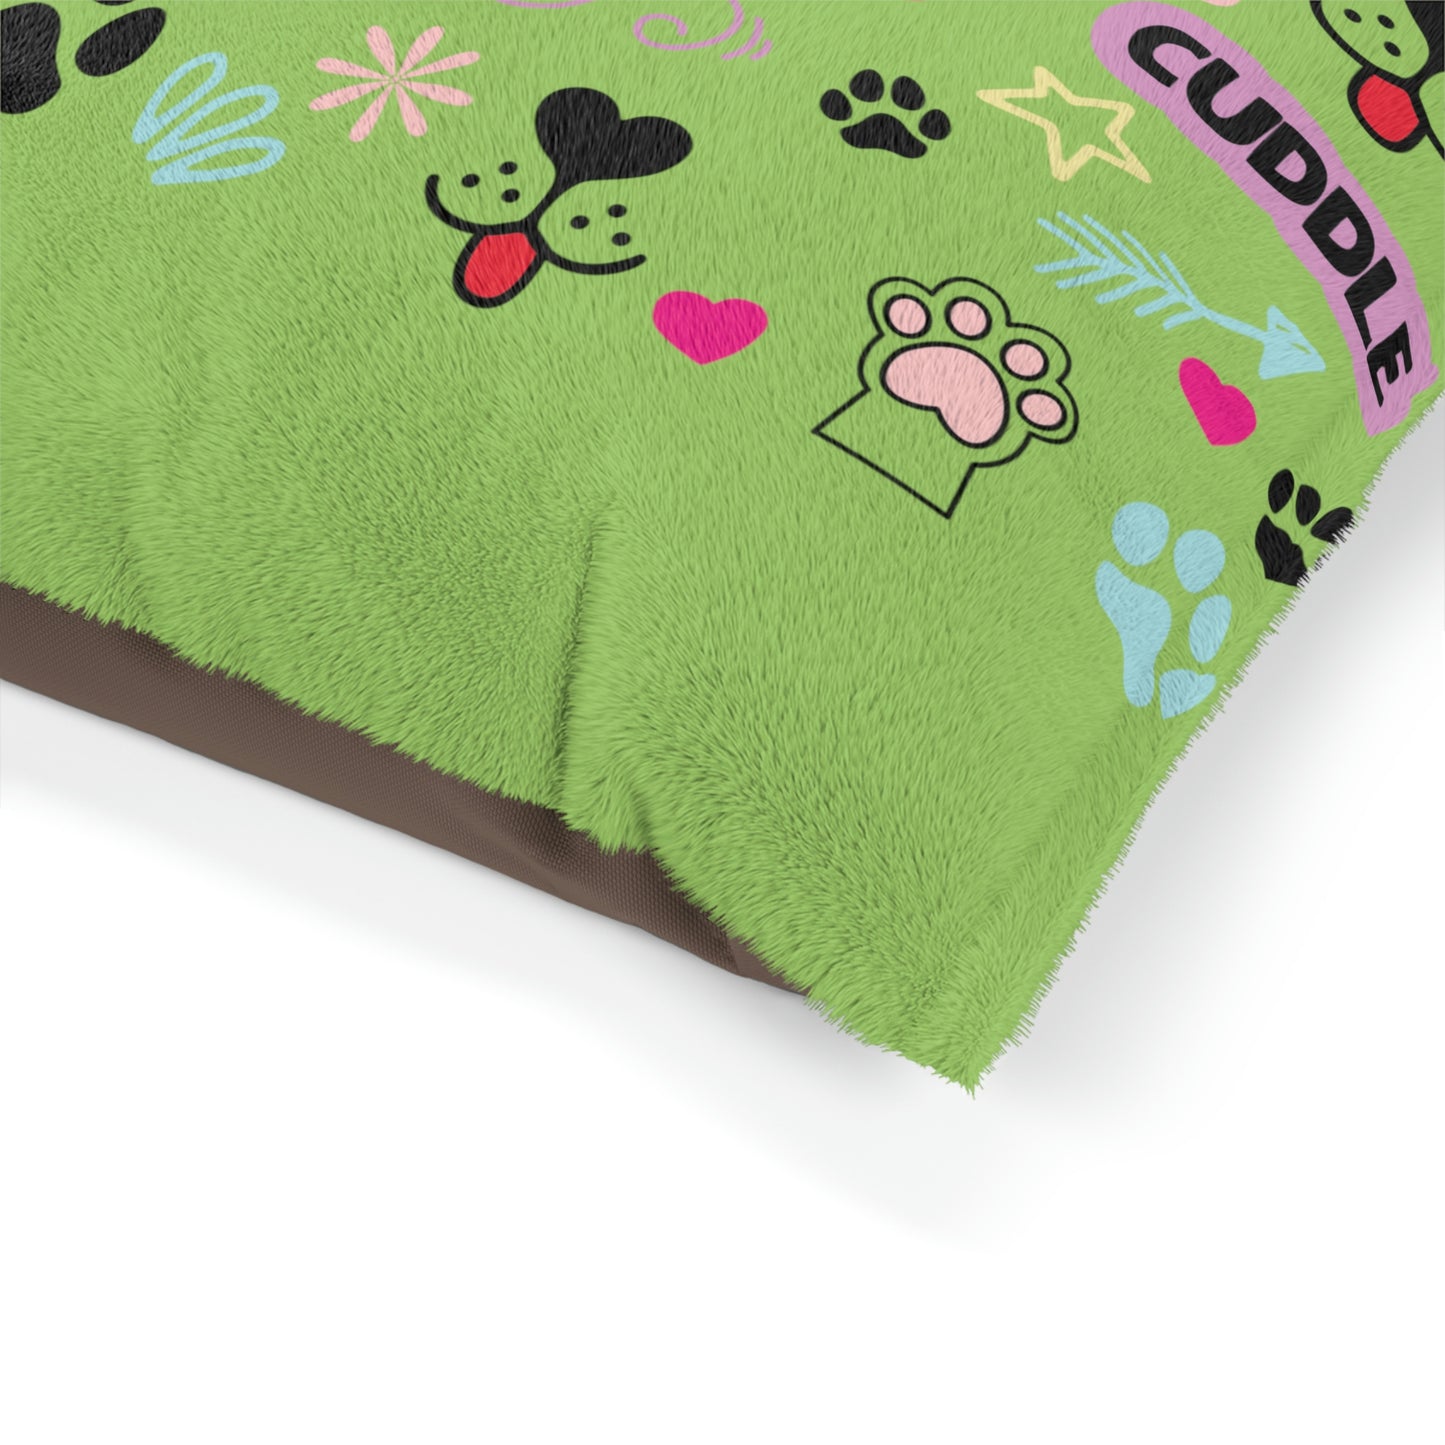 Mint Dog Bed Soft Dog Pillow with Modern Cute Style